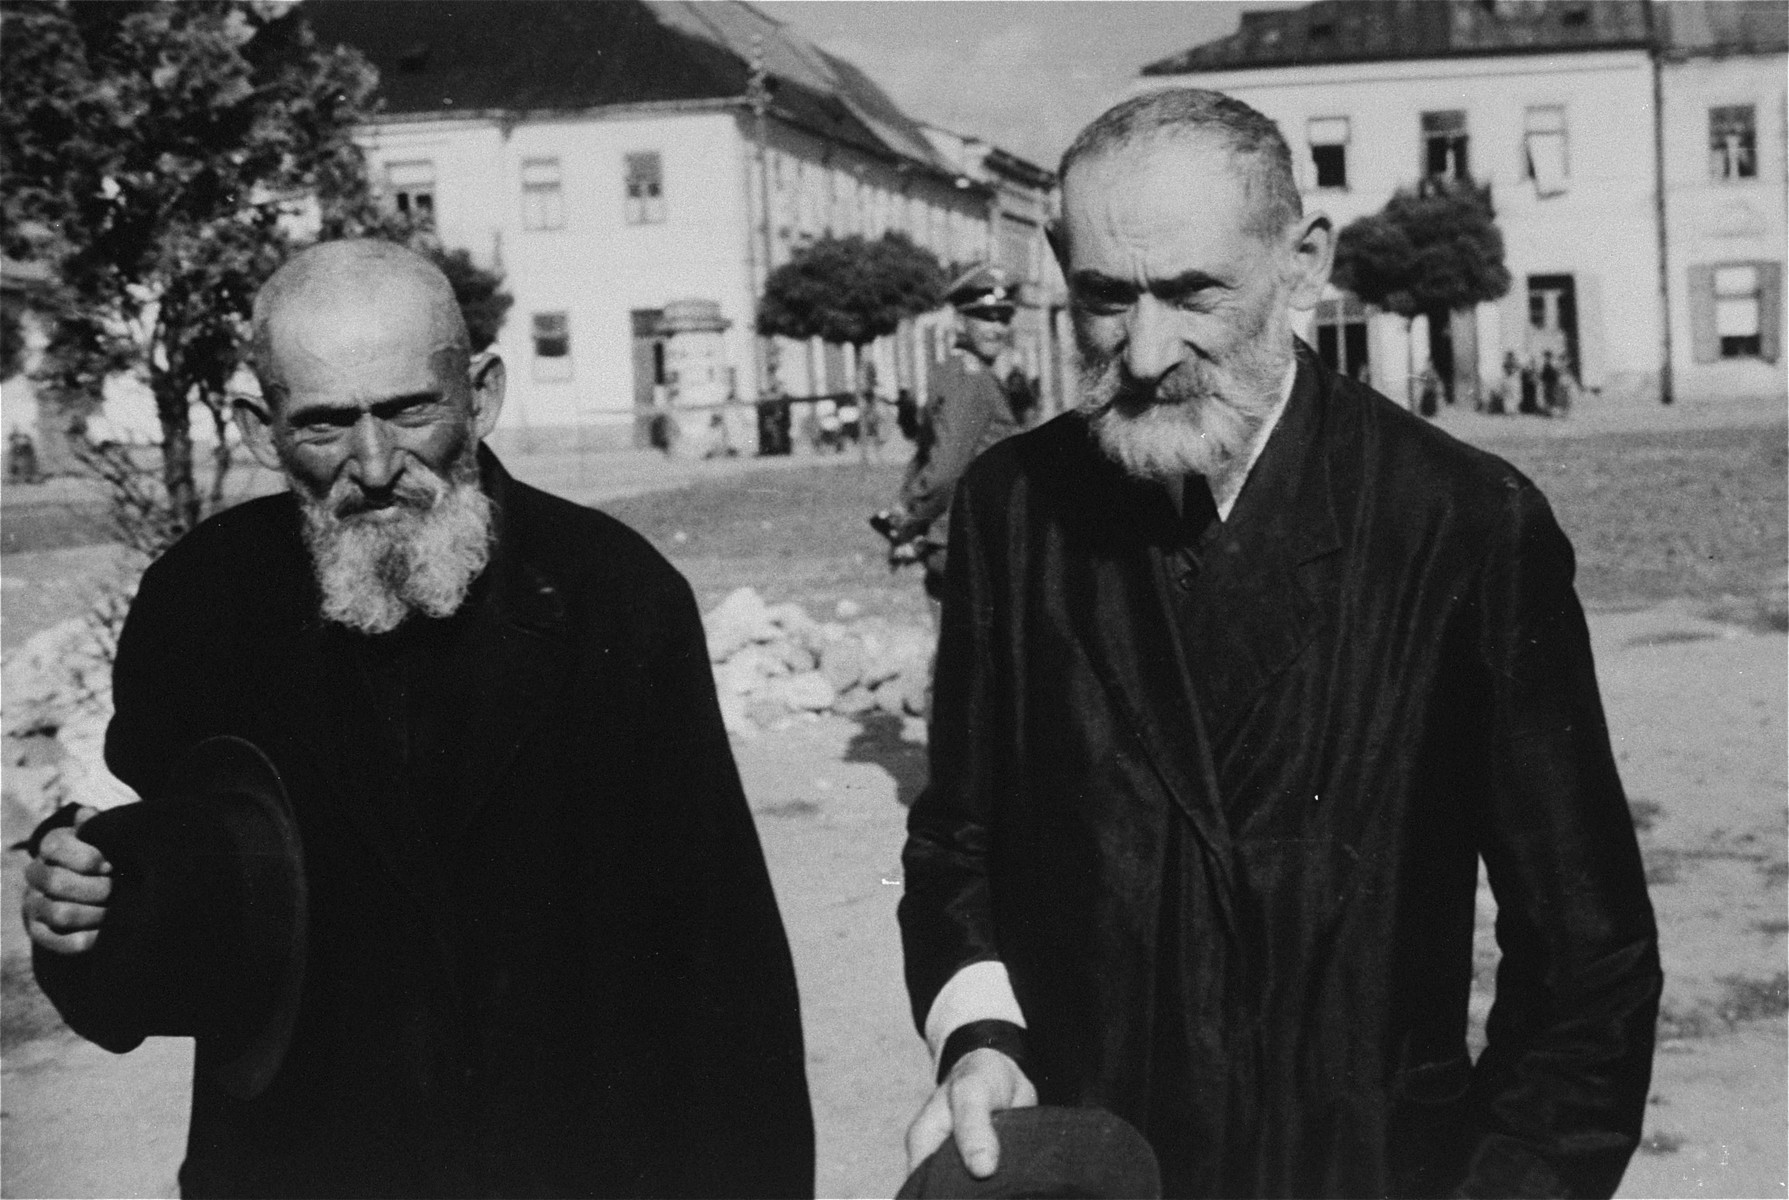 Two religious Jews wearing armbands are forced to remove their hats on a street in an unidentified ghetto.  

An SS officer is visible in the background.

The location of this photograph has been tentatively identified as Rynek Radom, Masovian Voivodeship, Poland.